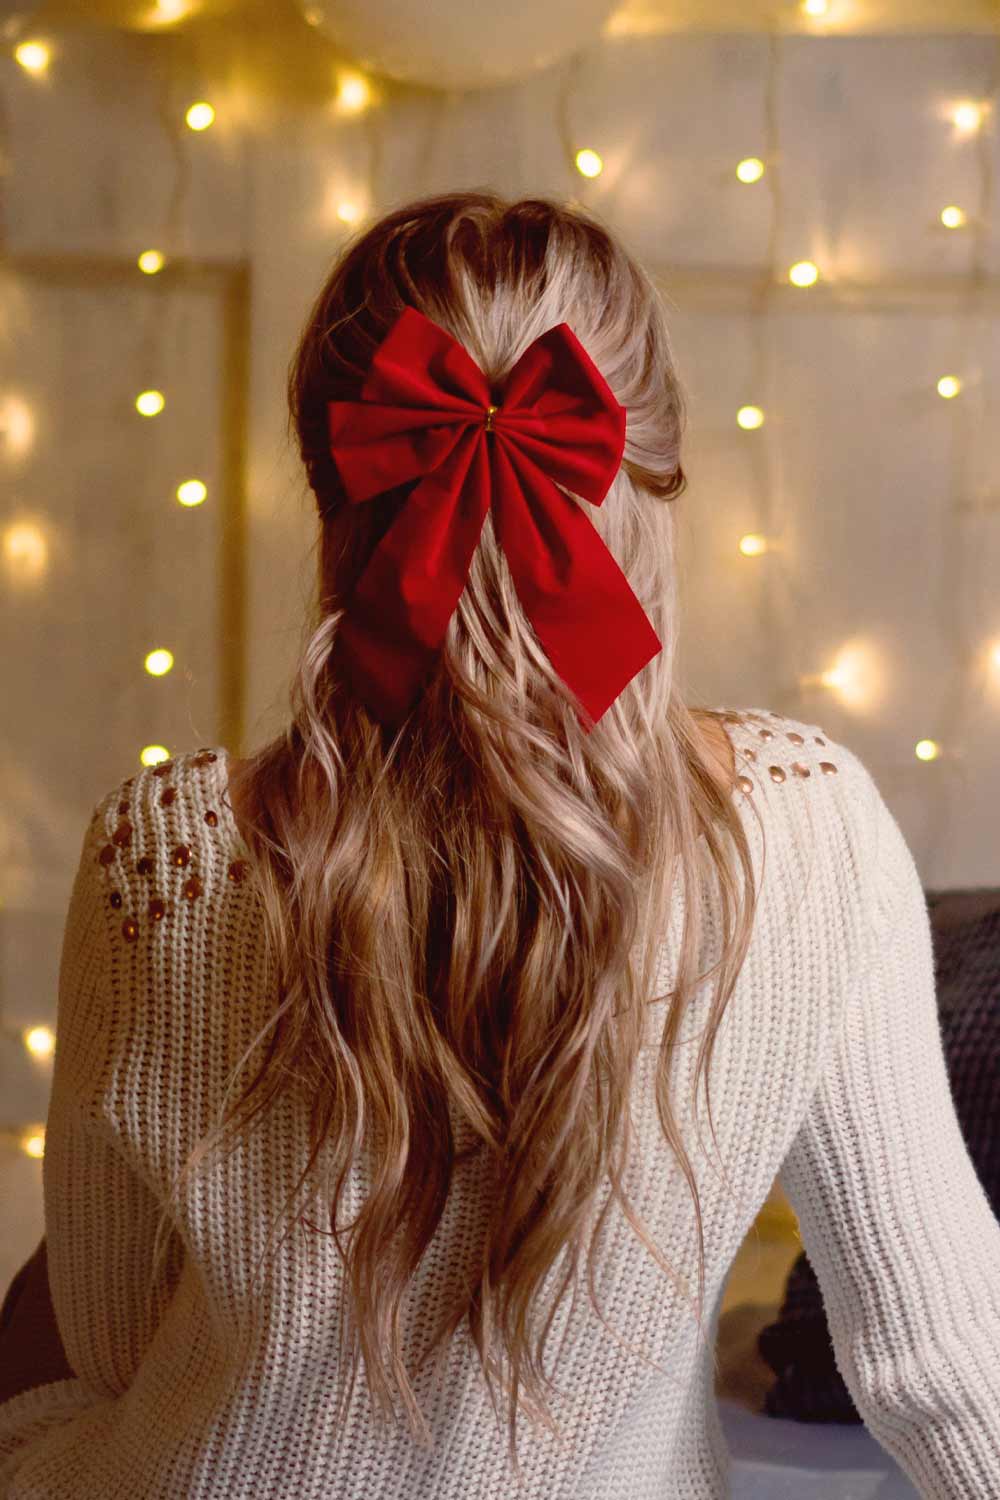 6 Quick and Easy Hairstyles Ideas using Hair Bows & Hair Ribbons